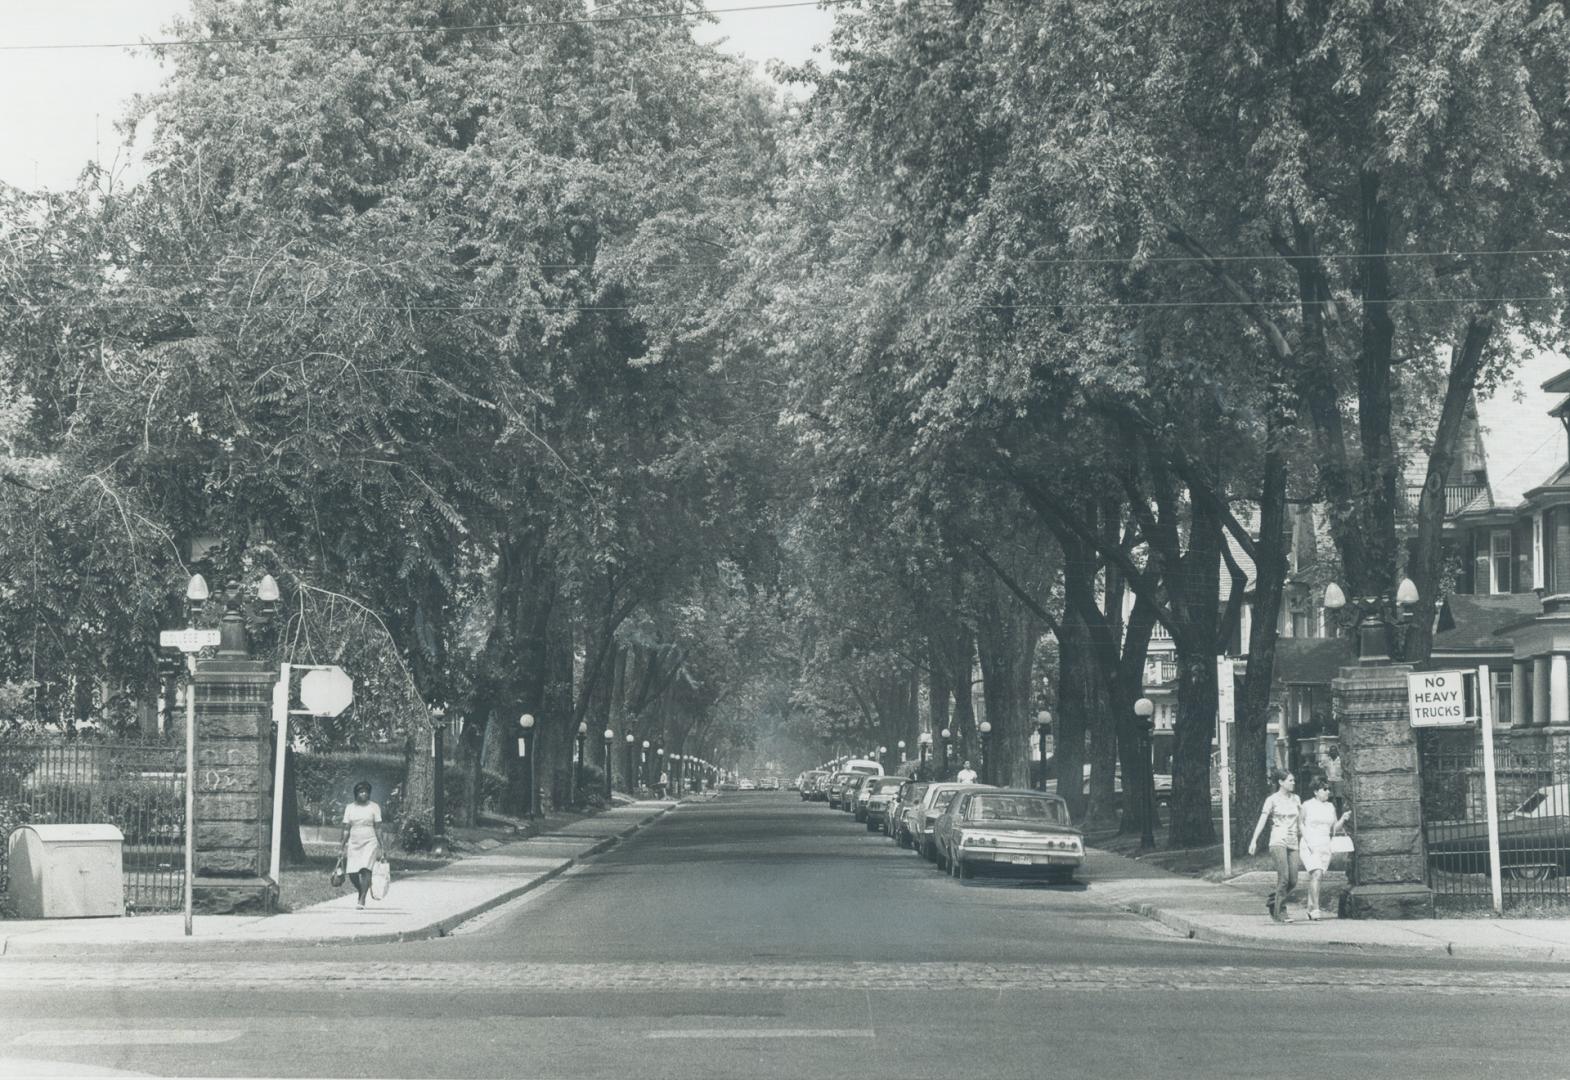 Stately trees, wrought iron lamp posts give an old world charm to Palmerston Blvd